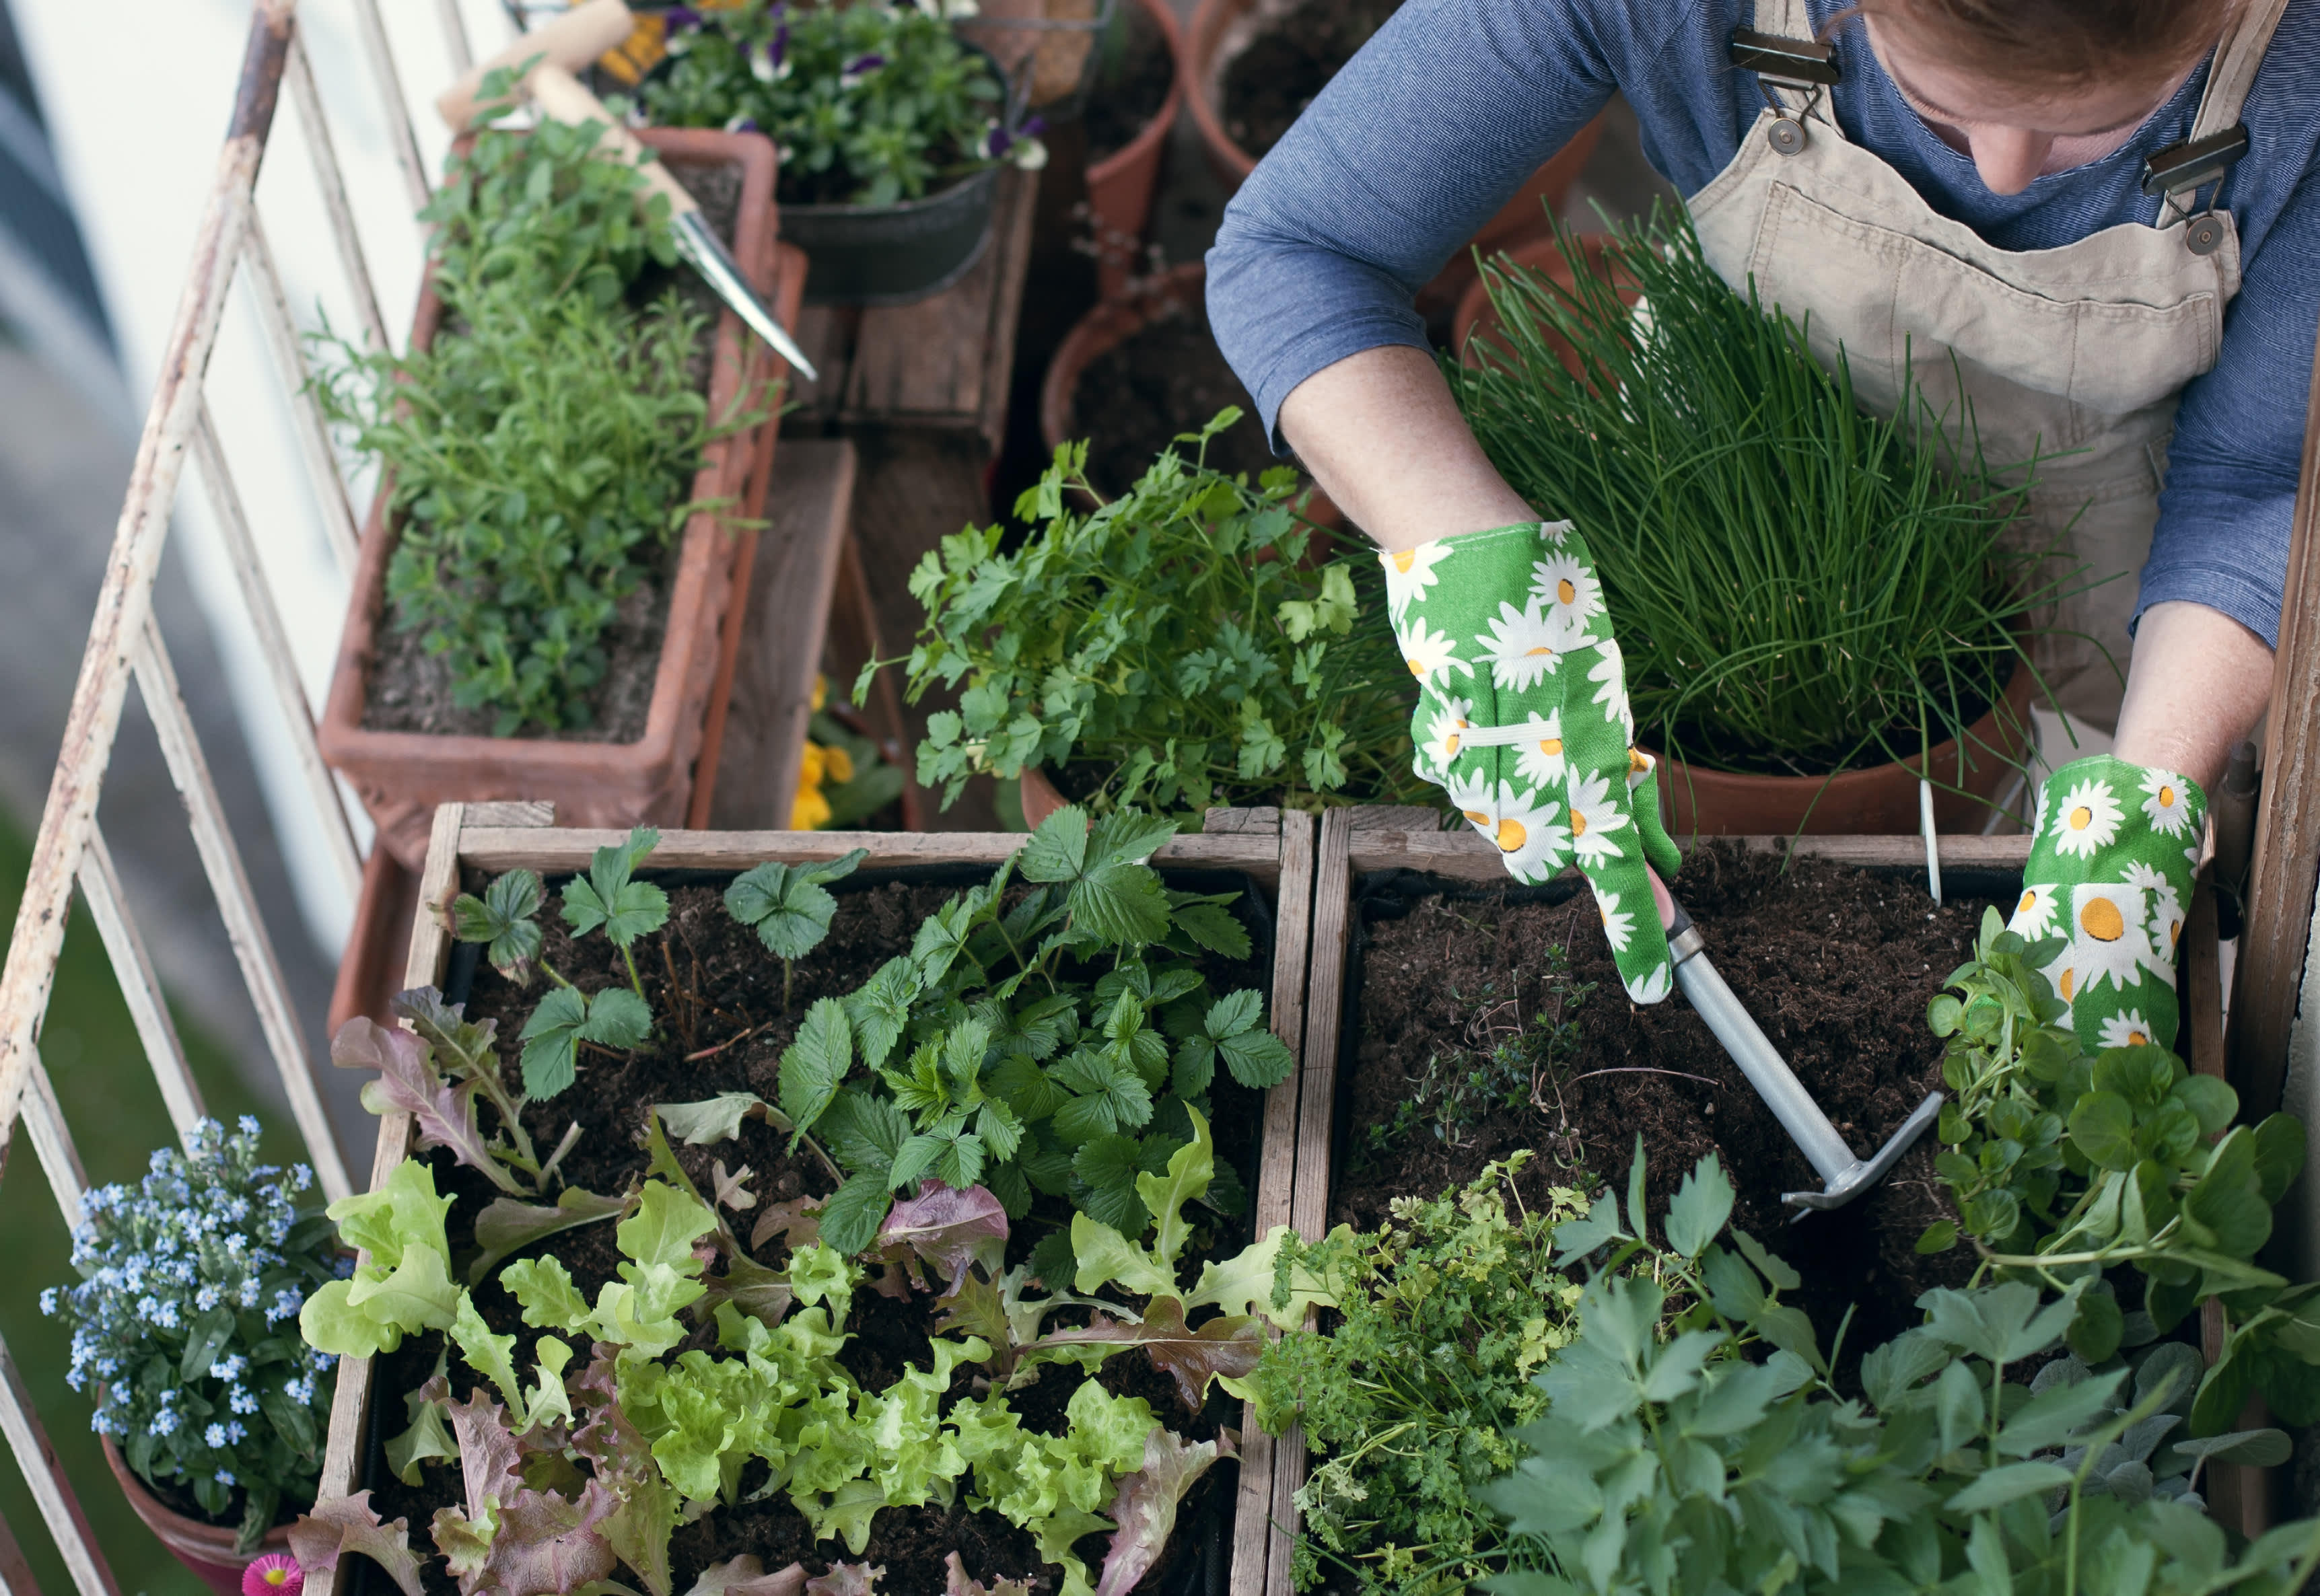 Reddit Tips On How To Grow Your Own Home Garden   Apartment Therapy